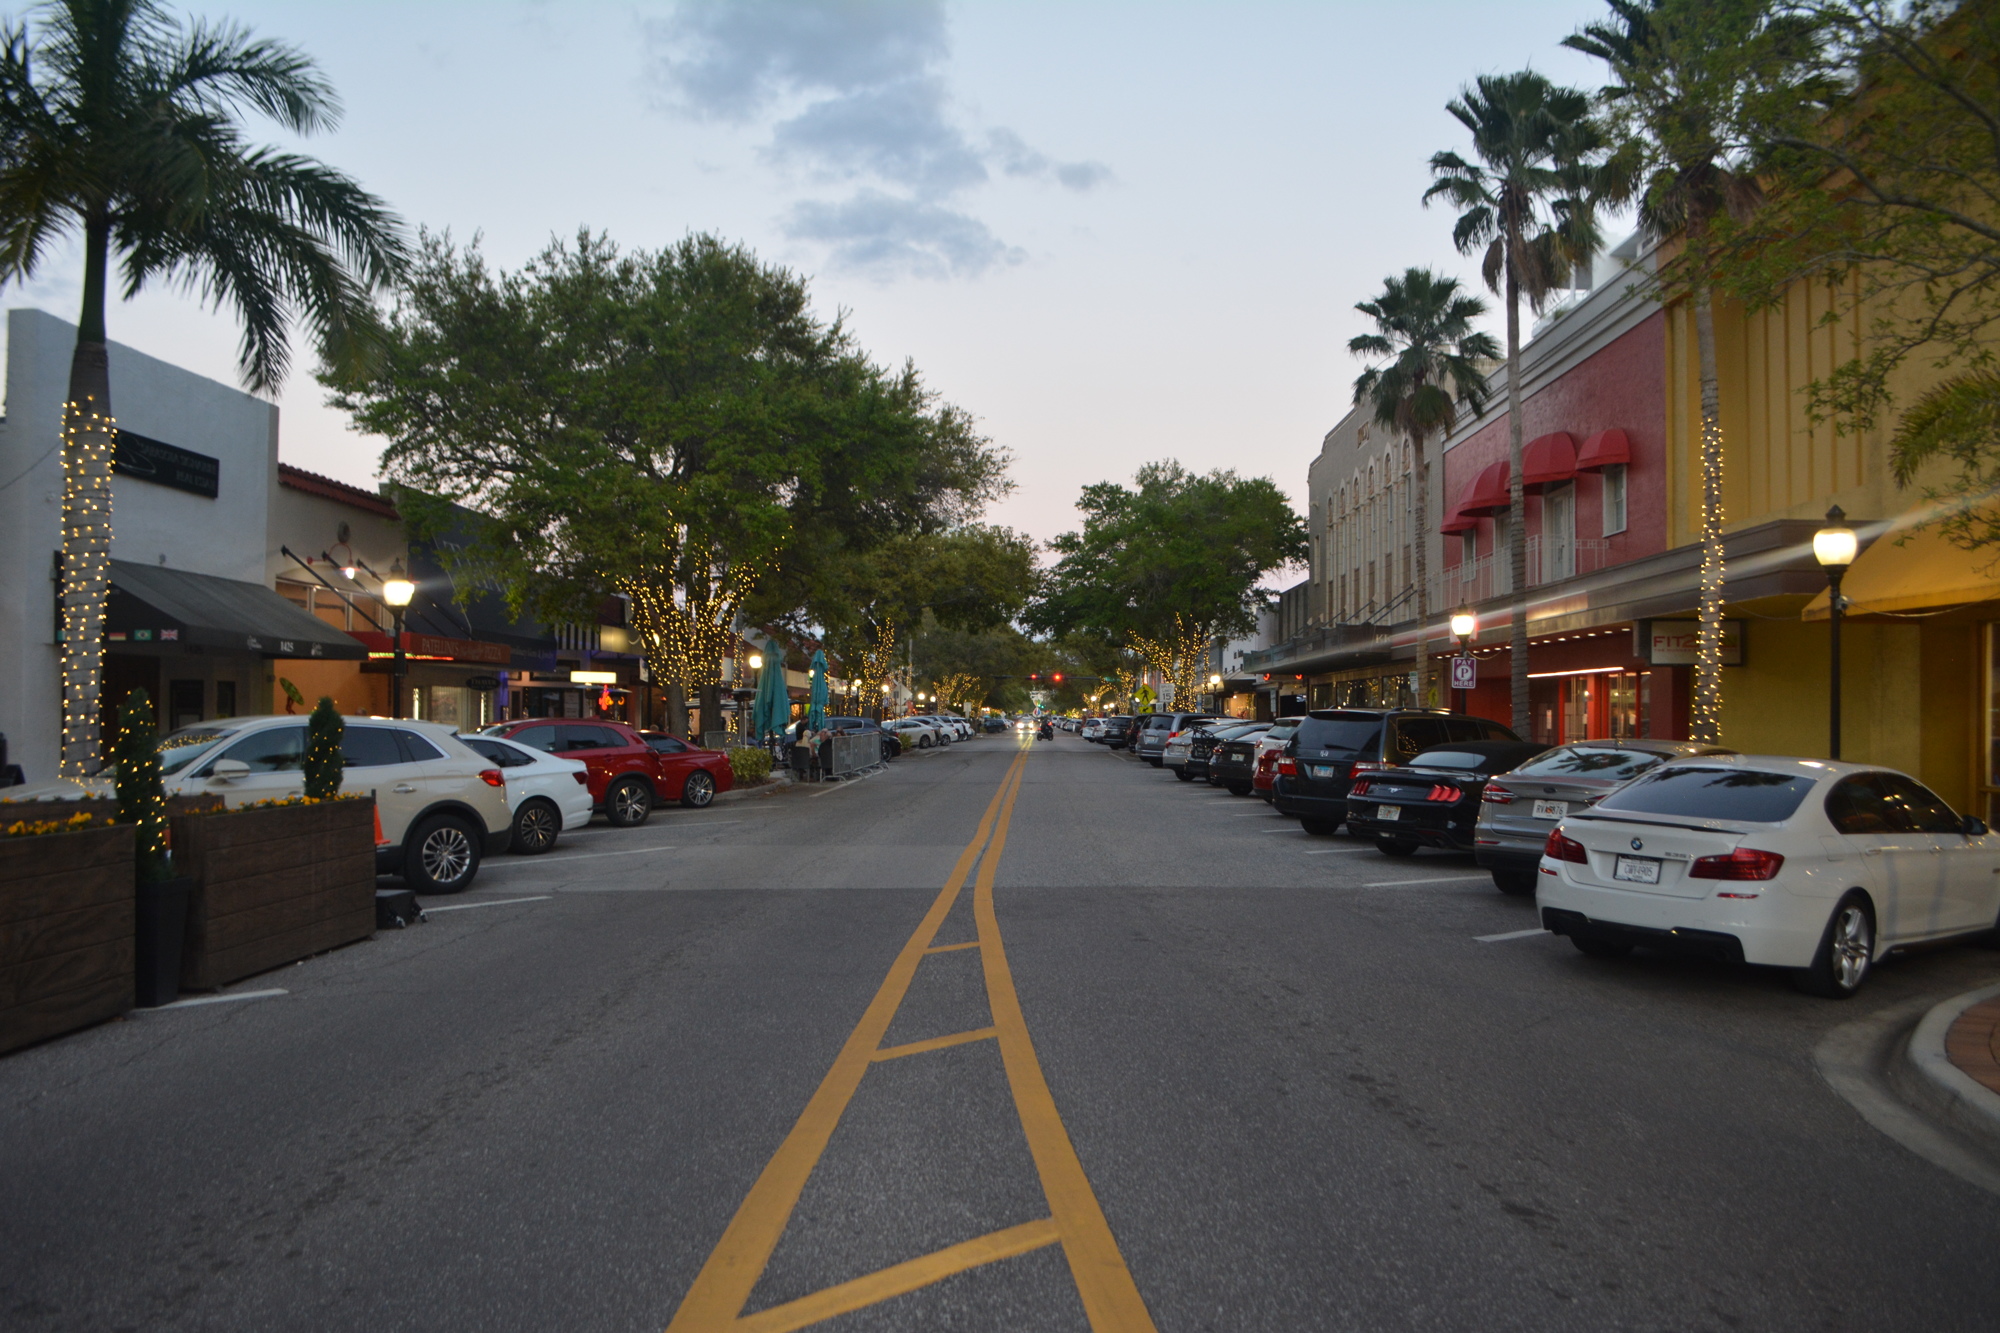 A proposal to remove angled parking from Main Street has drawn objections from some merchants, but city staff said any project is likely at least five years away.